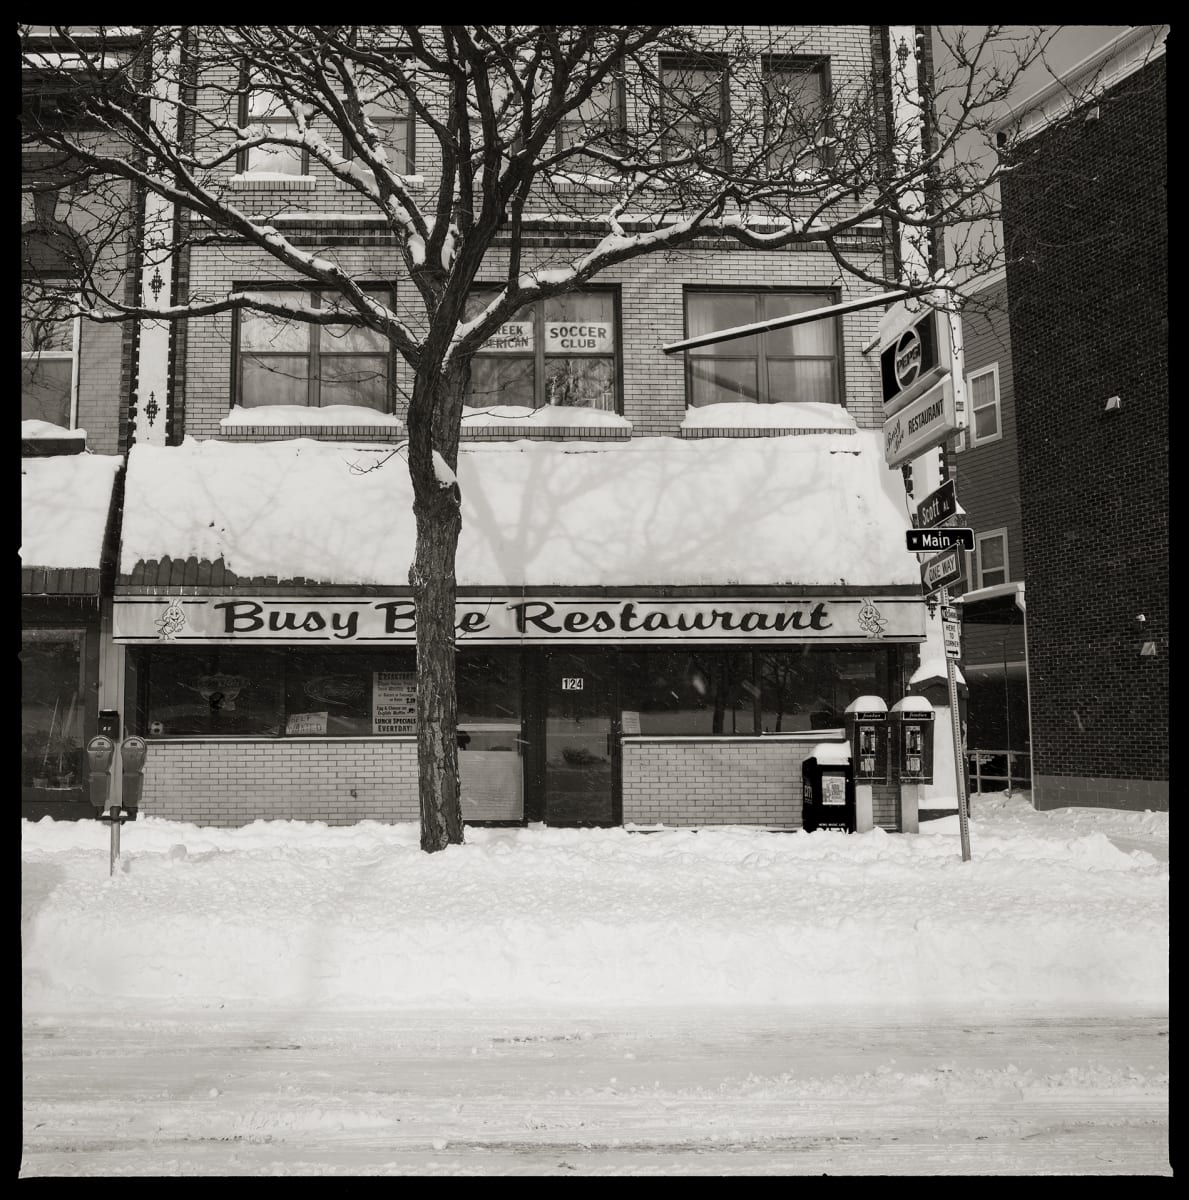 585.232.9542 & 585.232.9262 – Busy Bee Restaurant, 124 West Main Street, Rochester, NY 14614 by Eric T. Kunsman  Image: ID: A black and white image shows a snow covered road and restaurant on a corner.  There are two pay phones on the right side of the restaurant that also have snow on their tops.  The awning says "Busy Bee Restaurant".